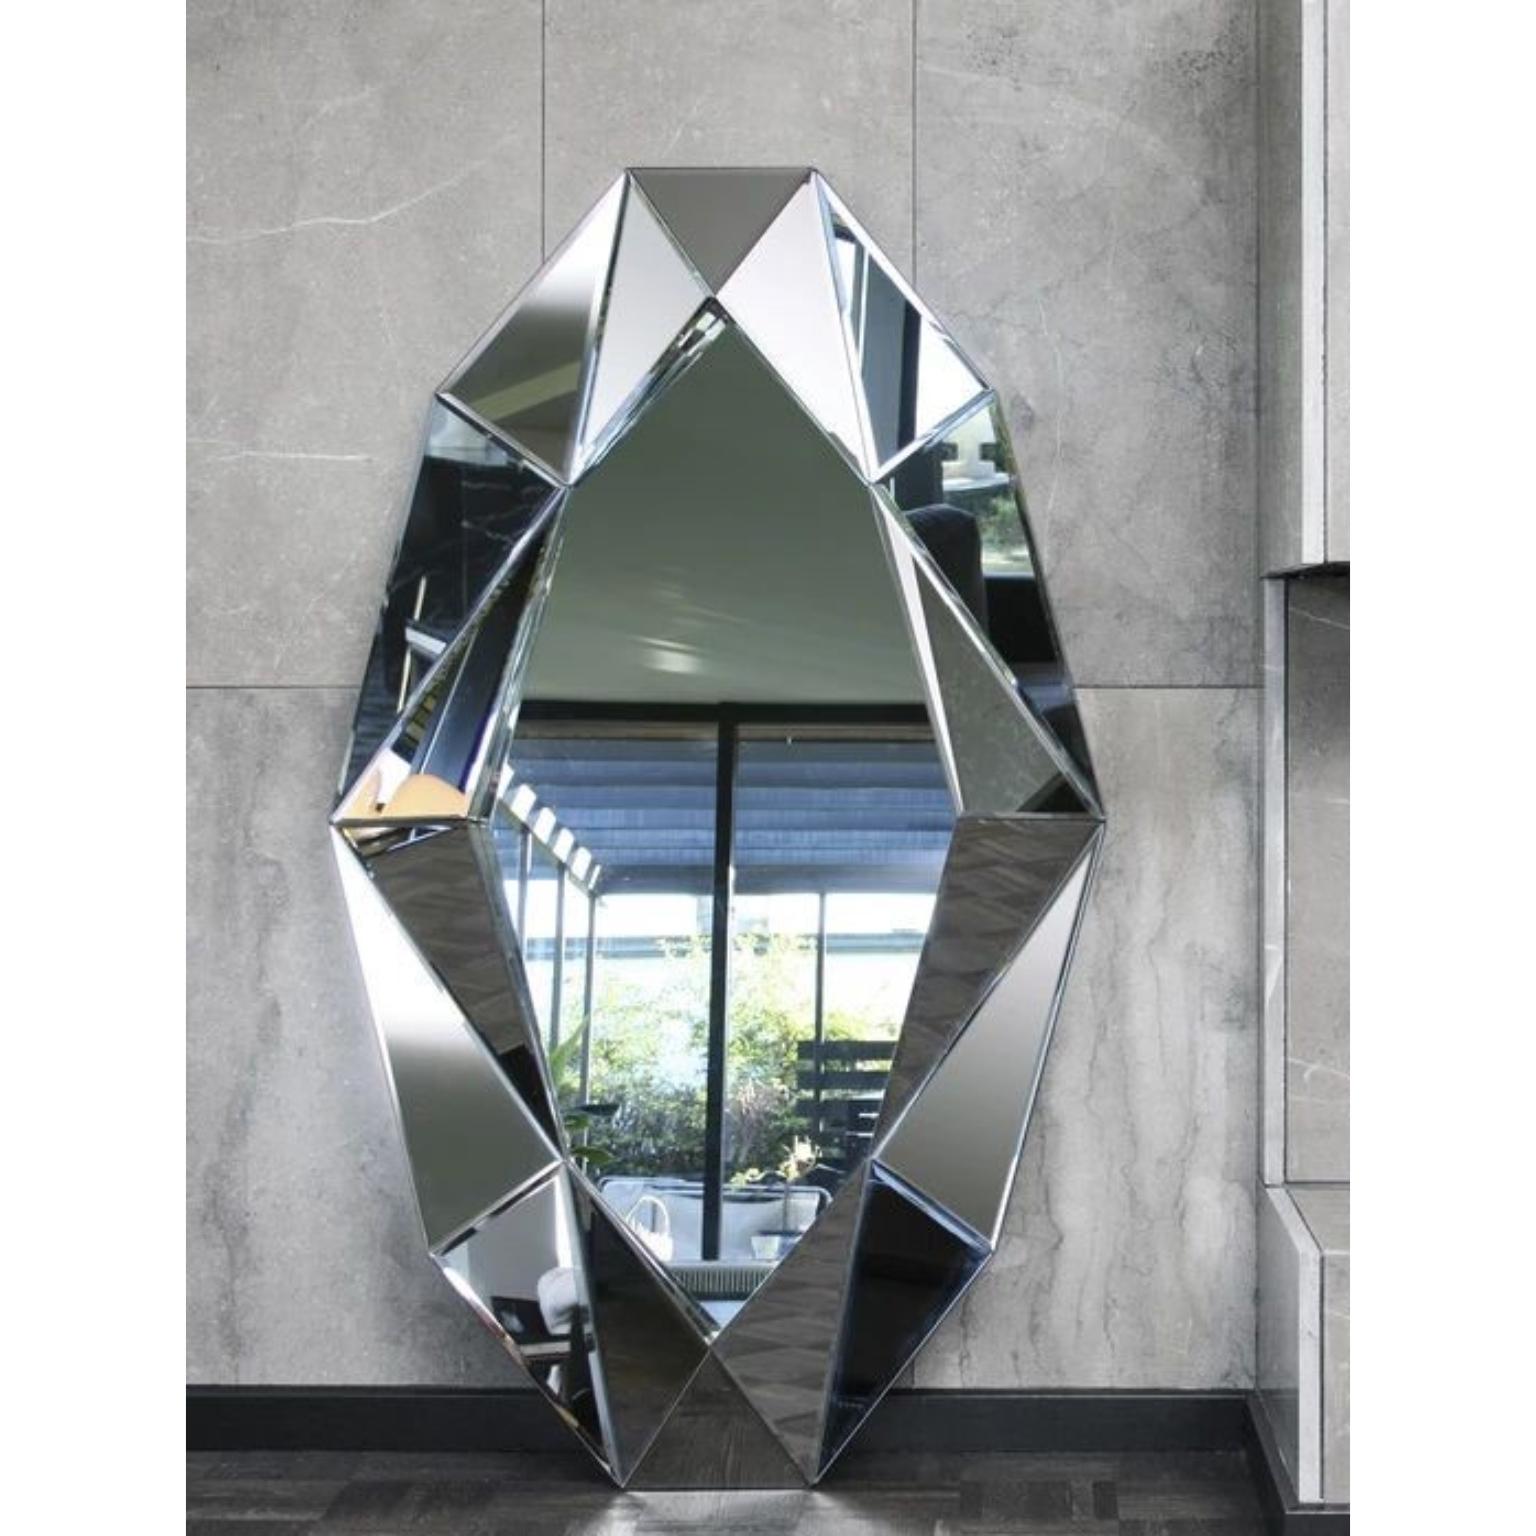 Diamond XL mirror silver.
Dimensions: W 82 x D 6.7 x H 140 cm
Material: 4 mm faceted mirror on black painted MDF
Weight: 17.4 kg

The diamond XL mirror is a magnificent full-body mirror that does not only provide functionality but becomes a